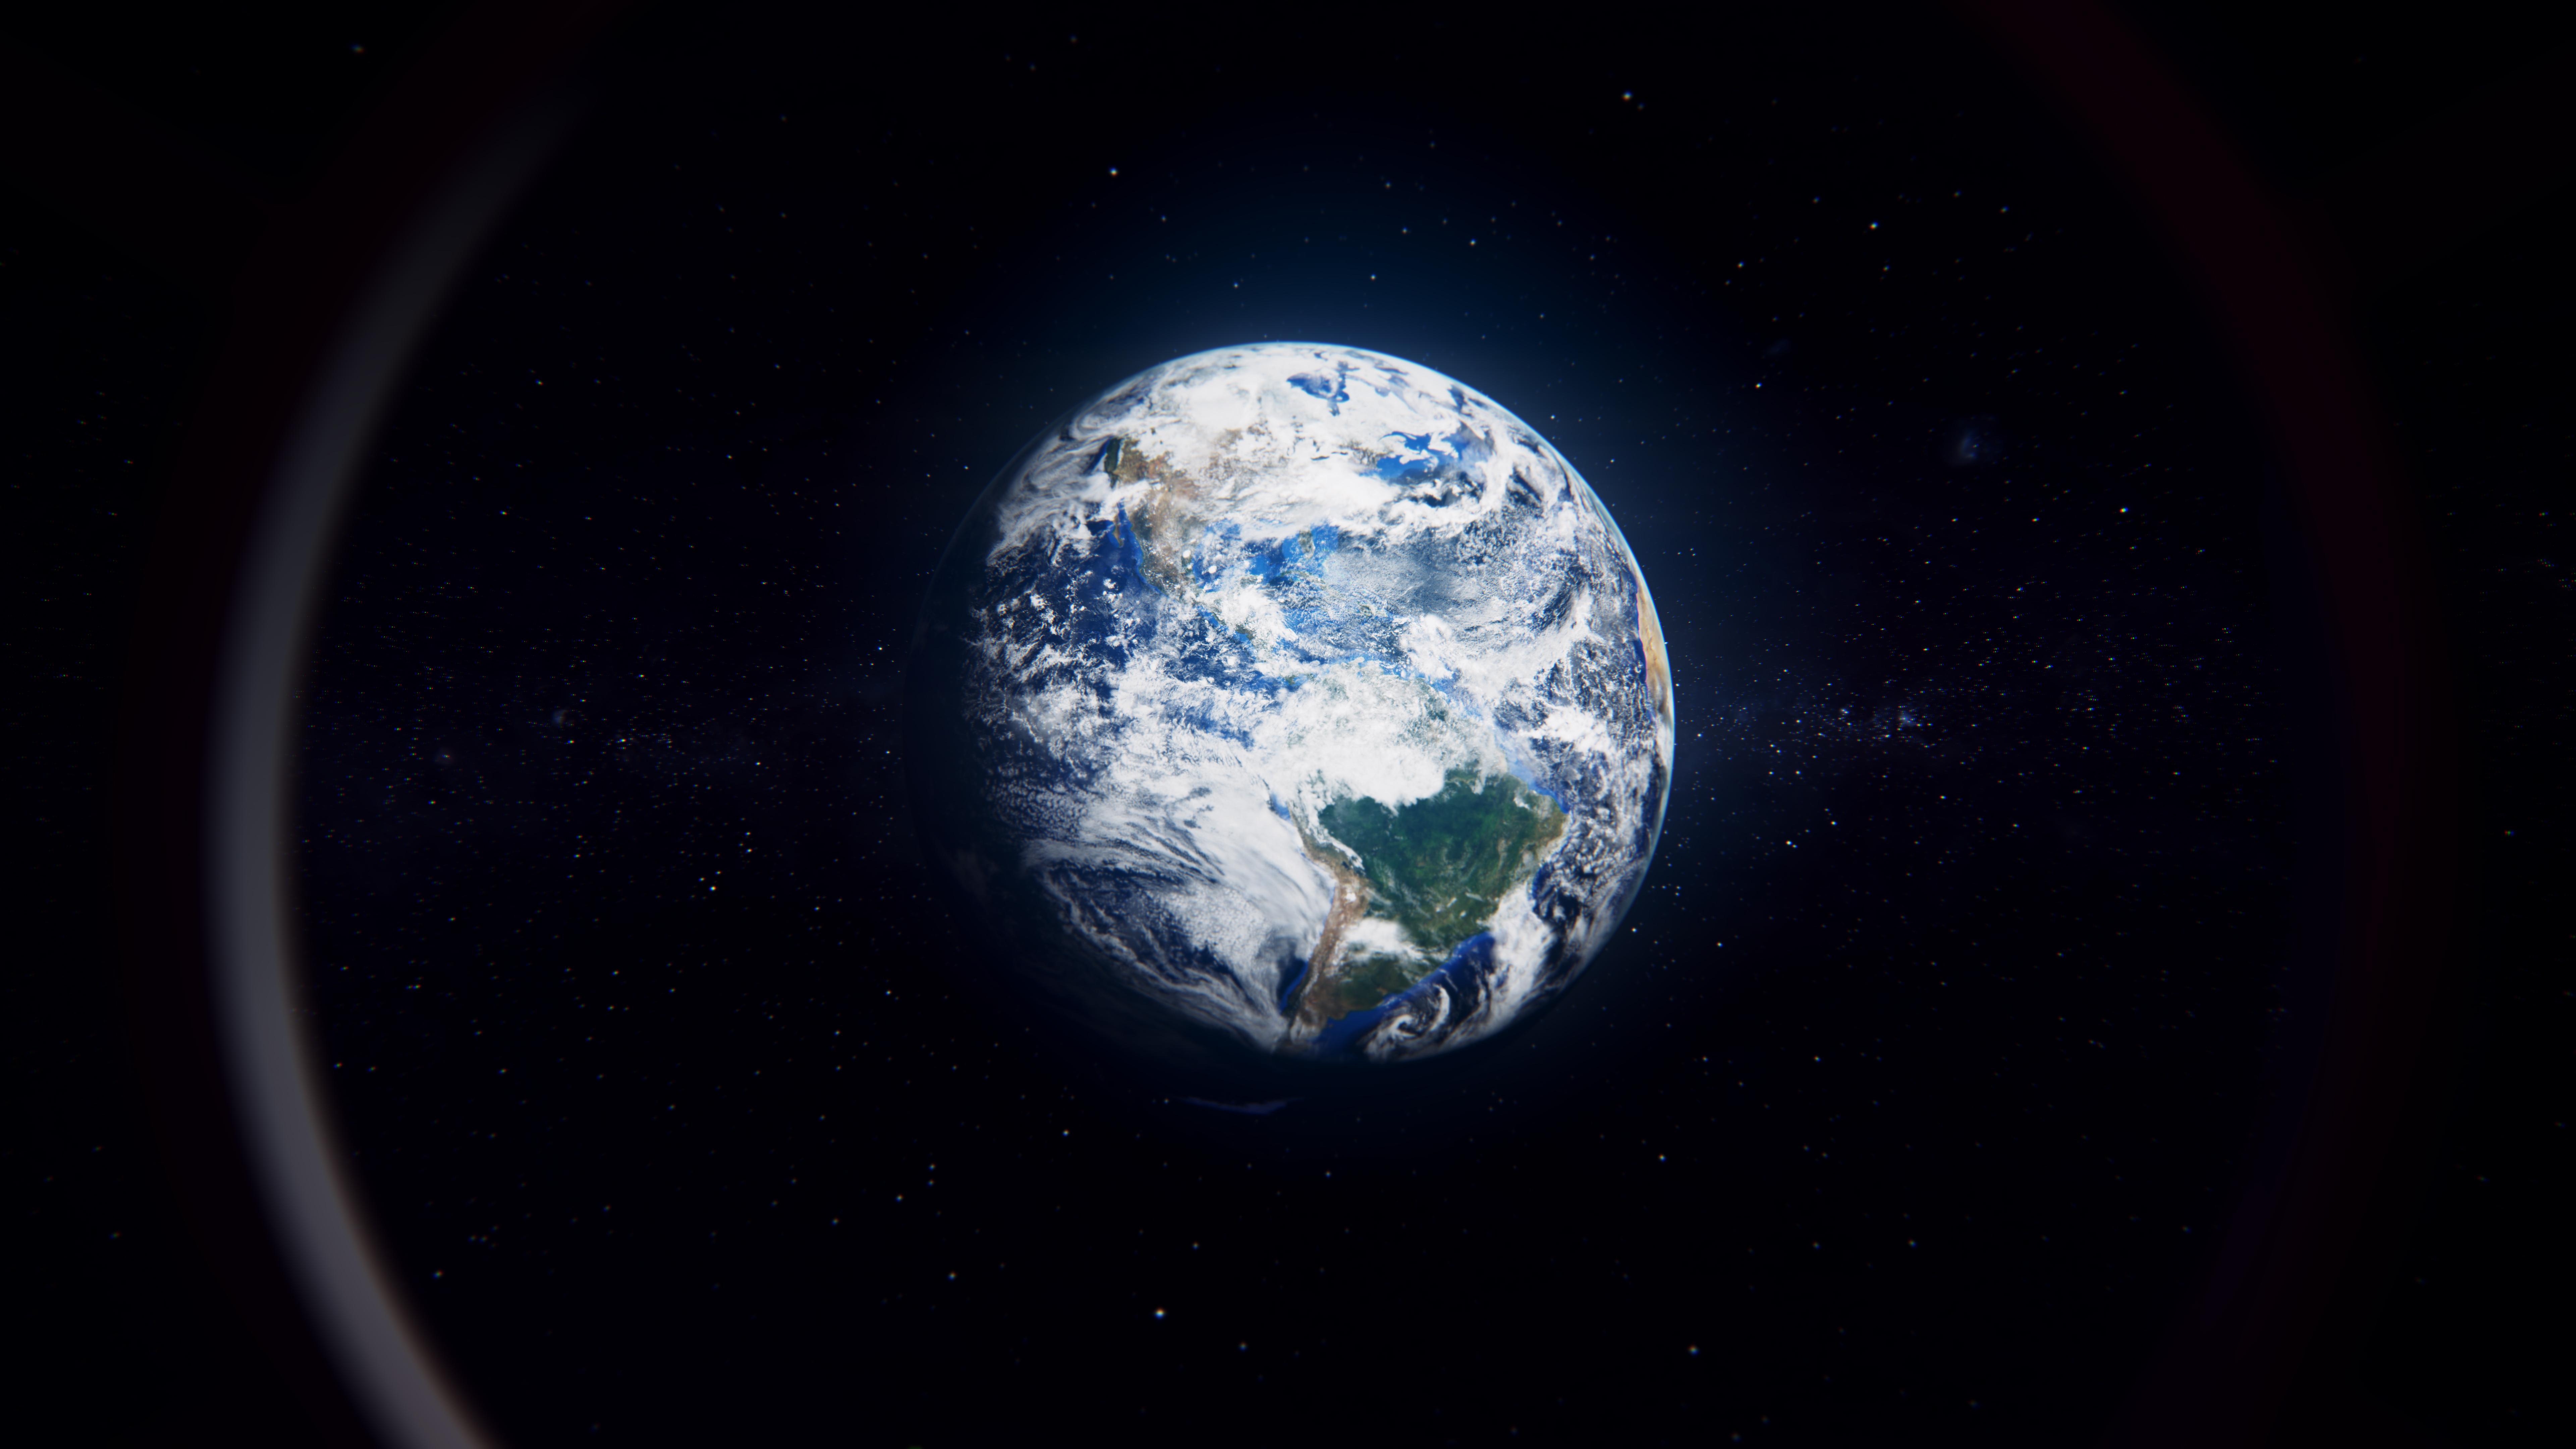 7680x4320 Earth View From Space 8k 8k HD 4k Wallpapers, Image, Backgrounds, Photos and Pictures